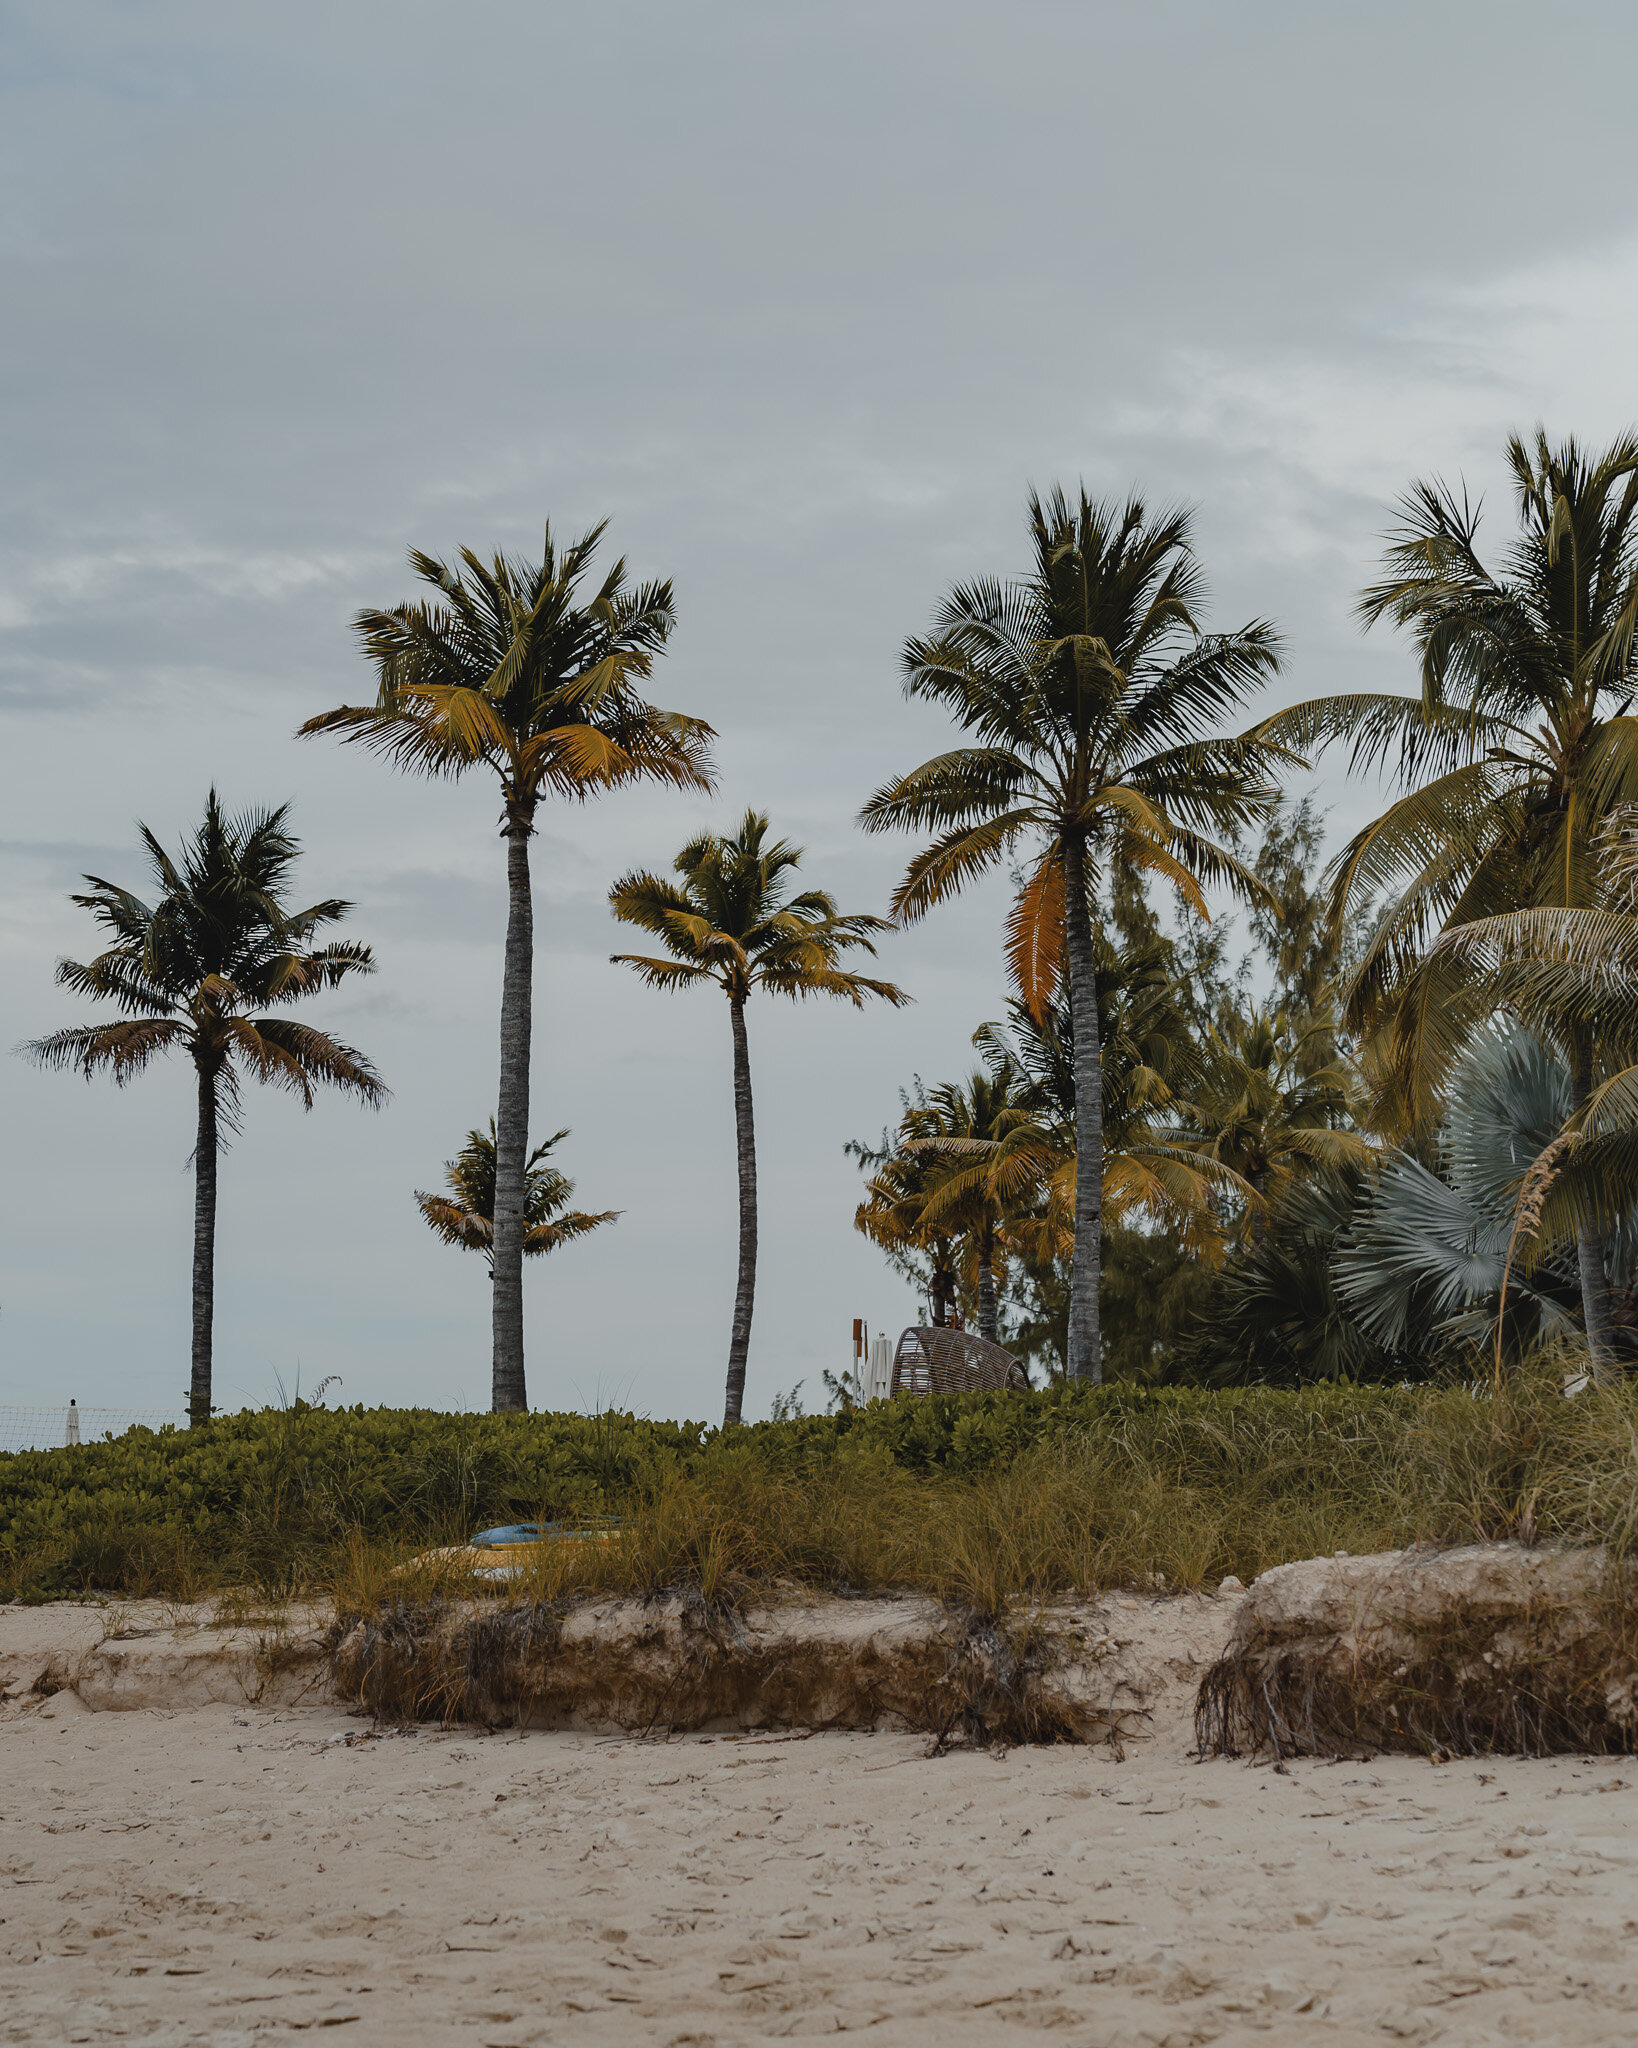 Some palm trees on the beach while taking a walk on the beach. Patiently waiting for the springtime so it's nice out. This ice mix is awful. 

Grace Bay Beach | Turks and Caicos | December 2023

 #photography #photooftheday #photo #travelphoto #trave